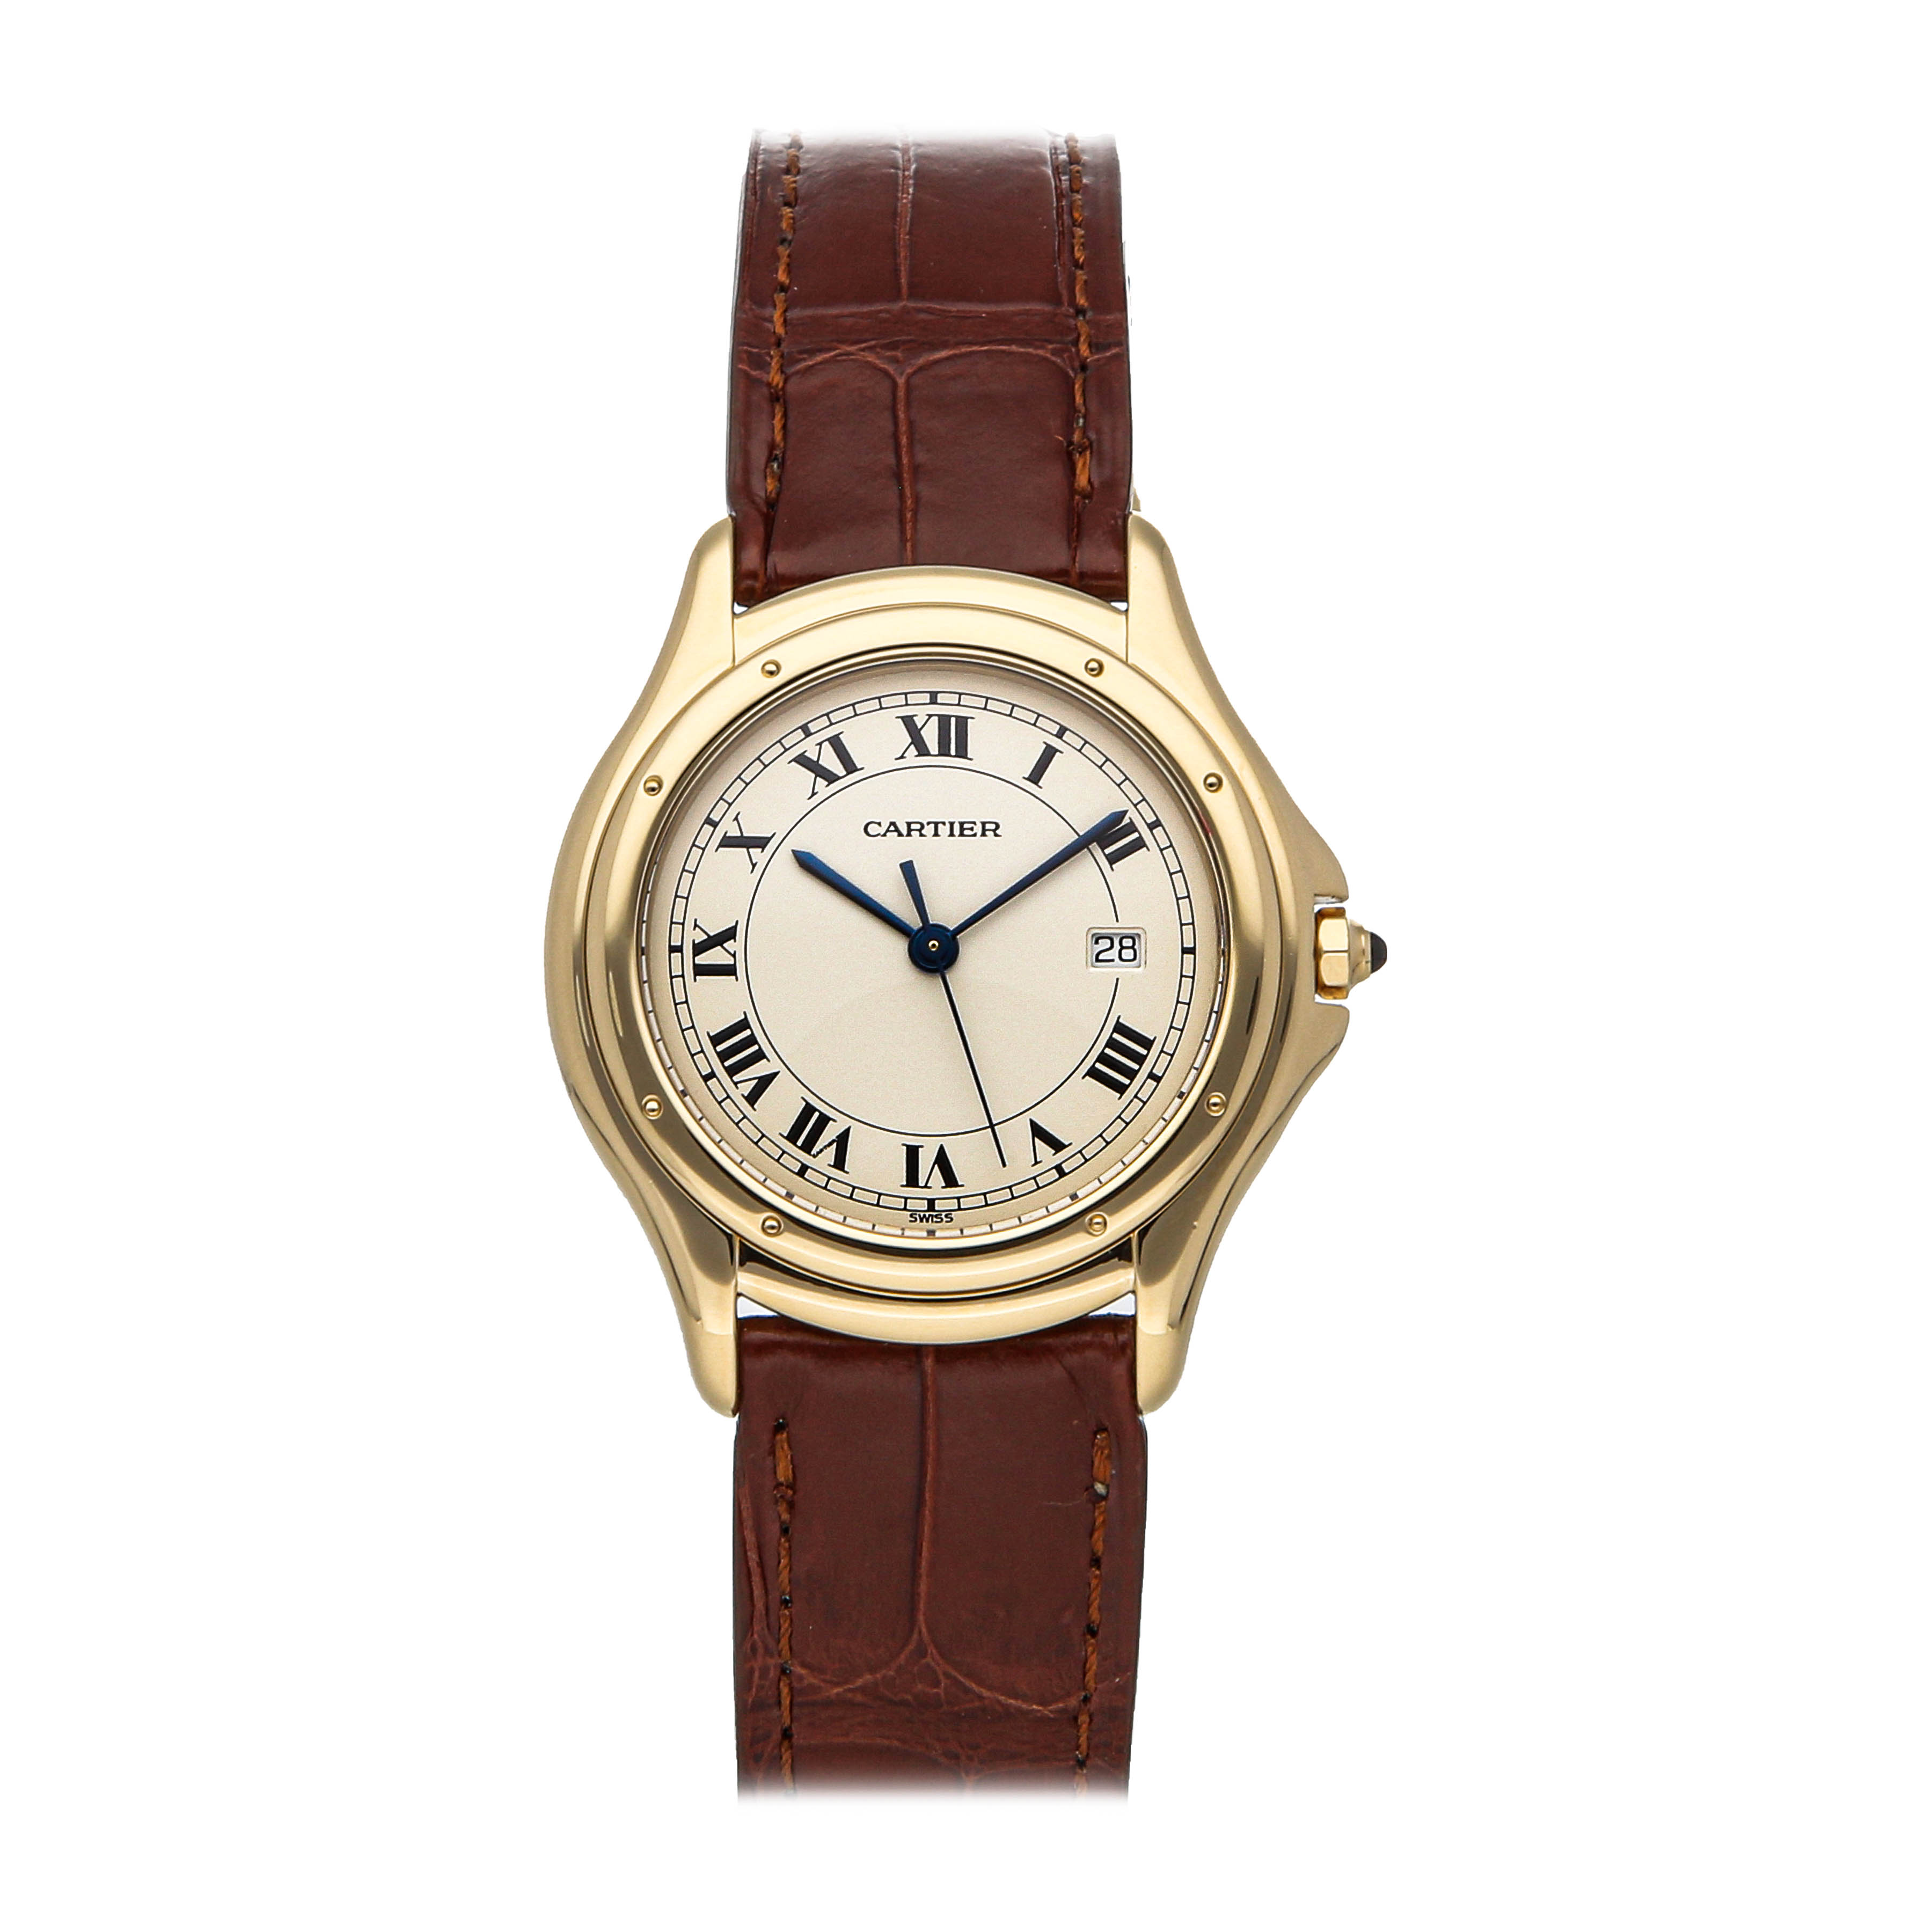 2nd hand cartier watches for sale